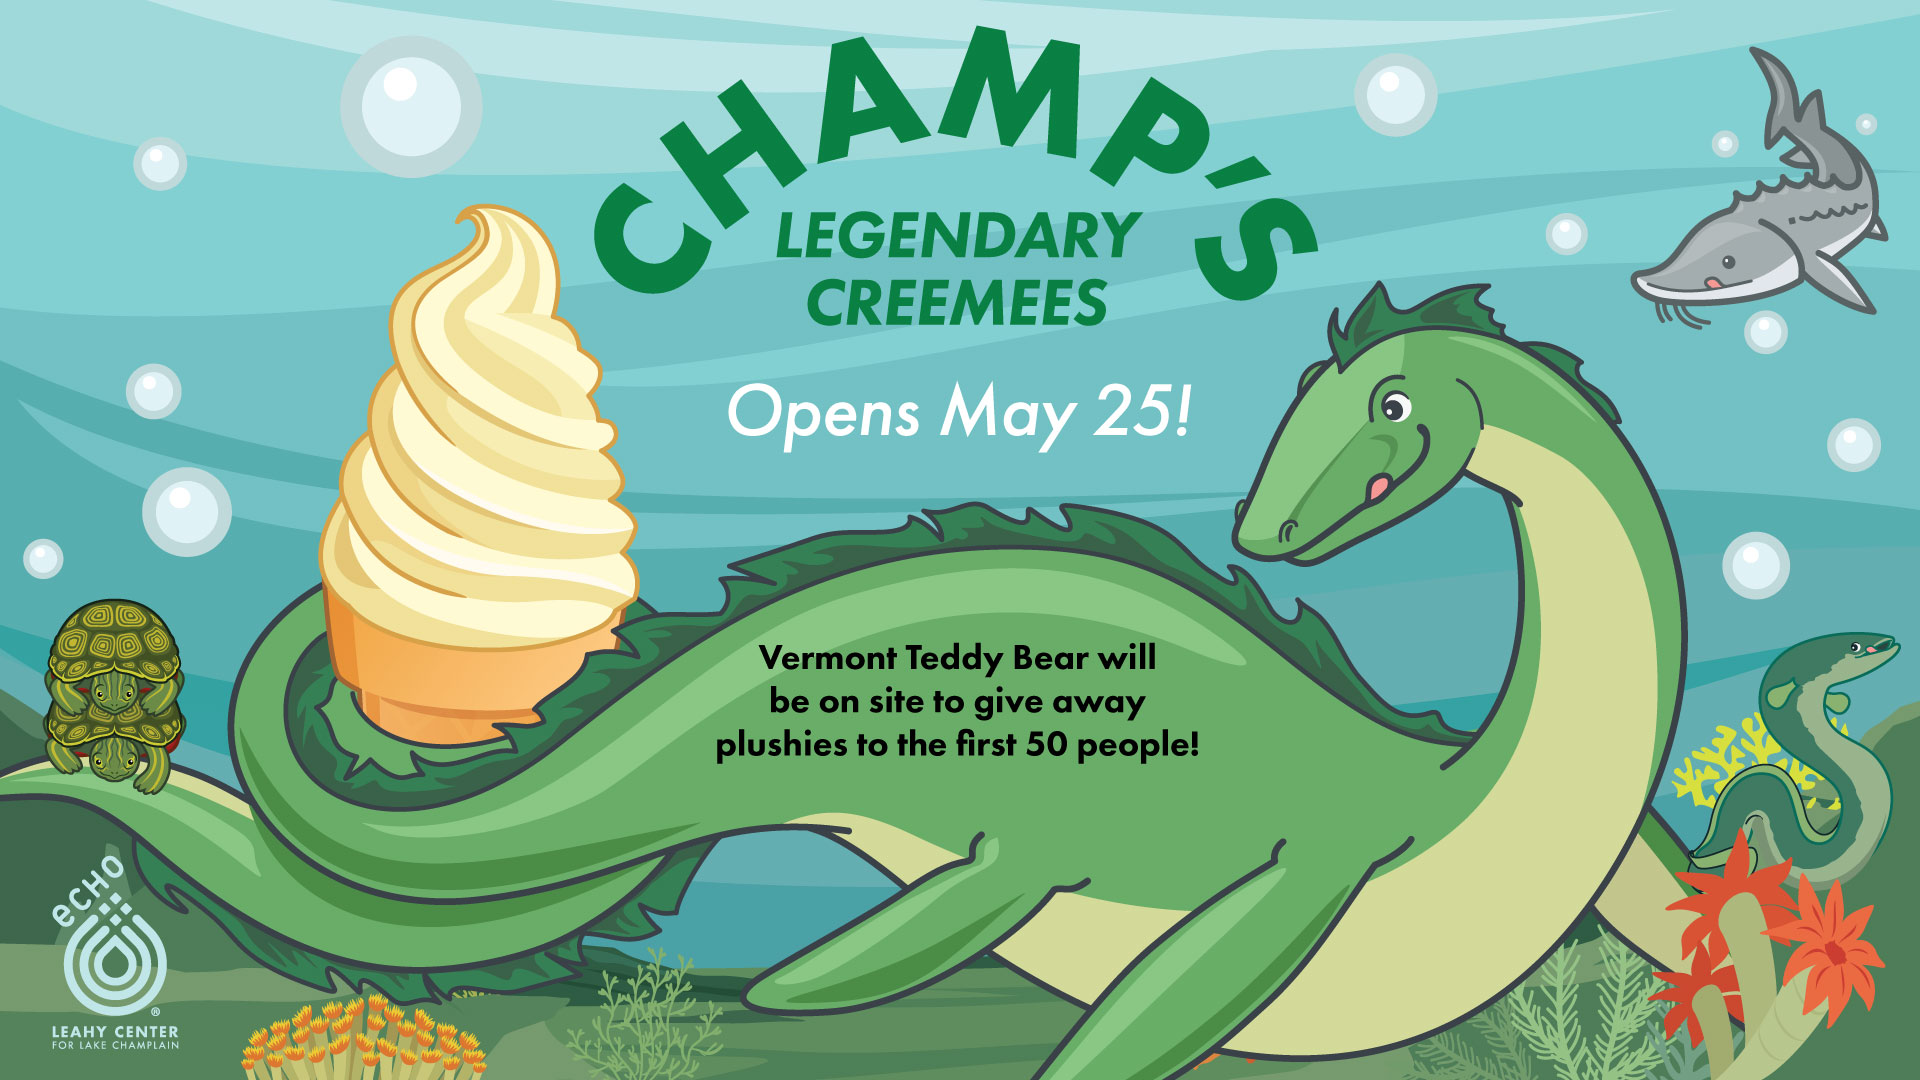 Champ's Legendary Creemees Opens May 25! Vermont Teddy Bear will be on site to give away plushies to the first 50 people!